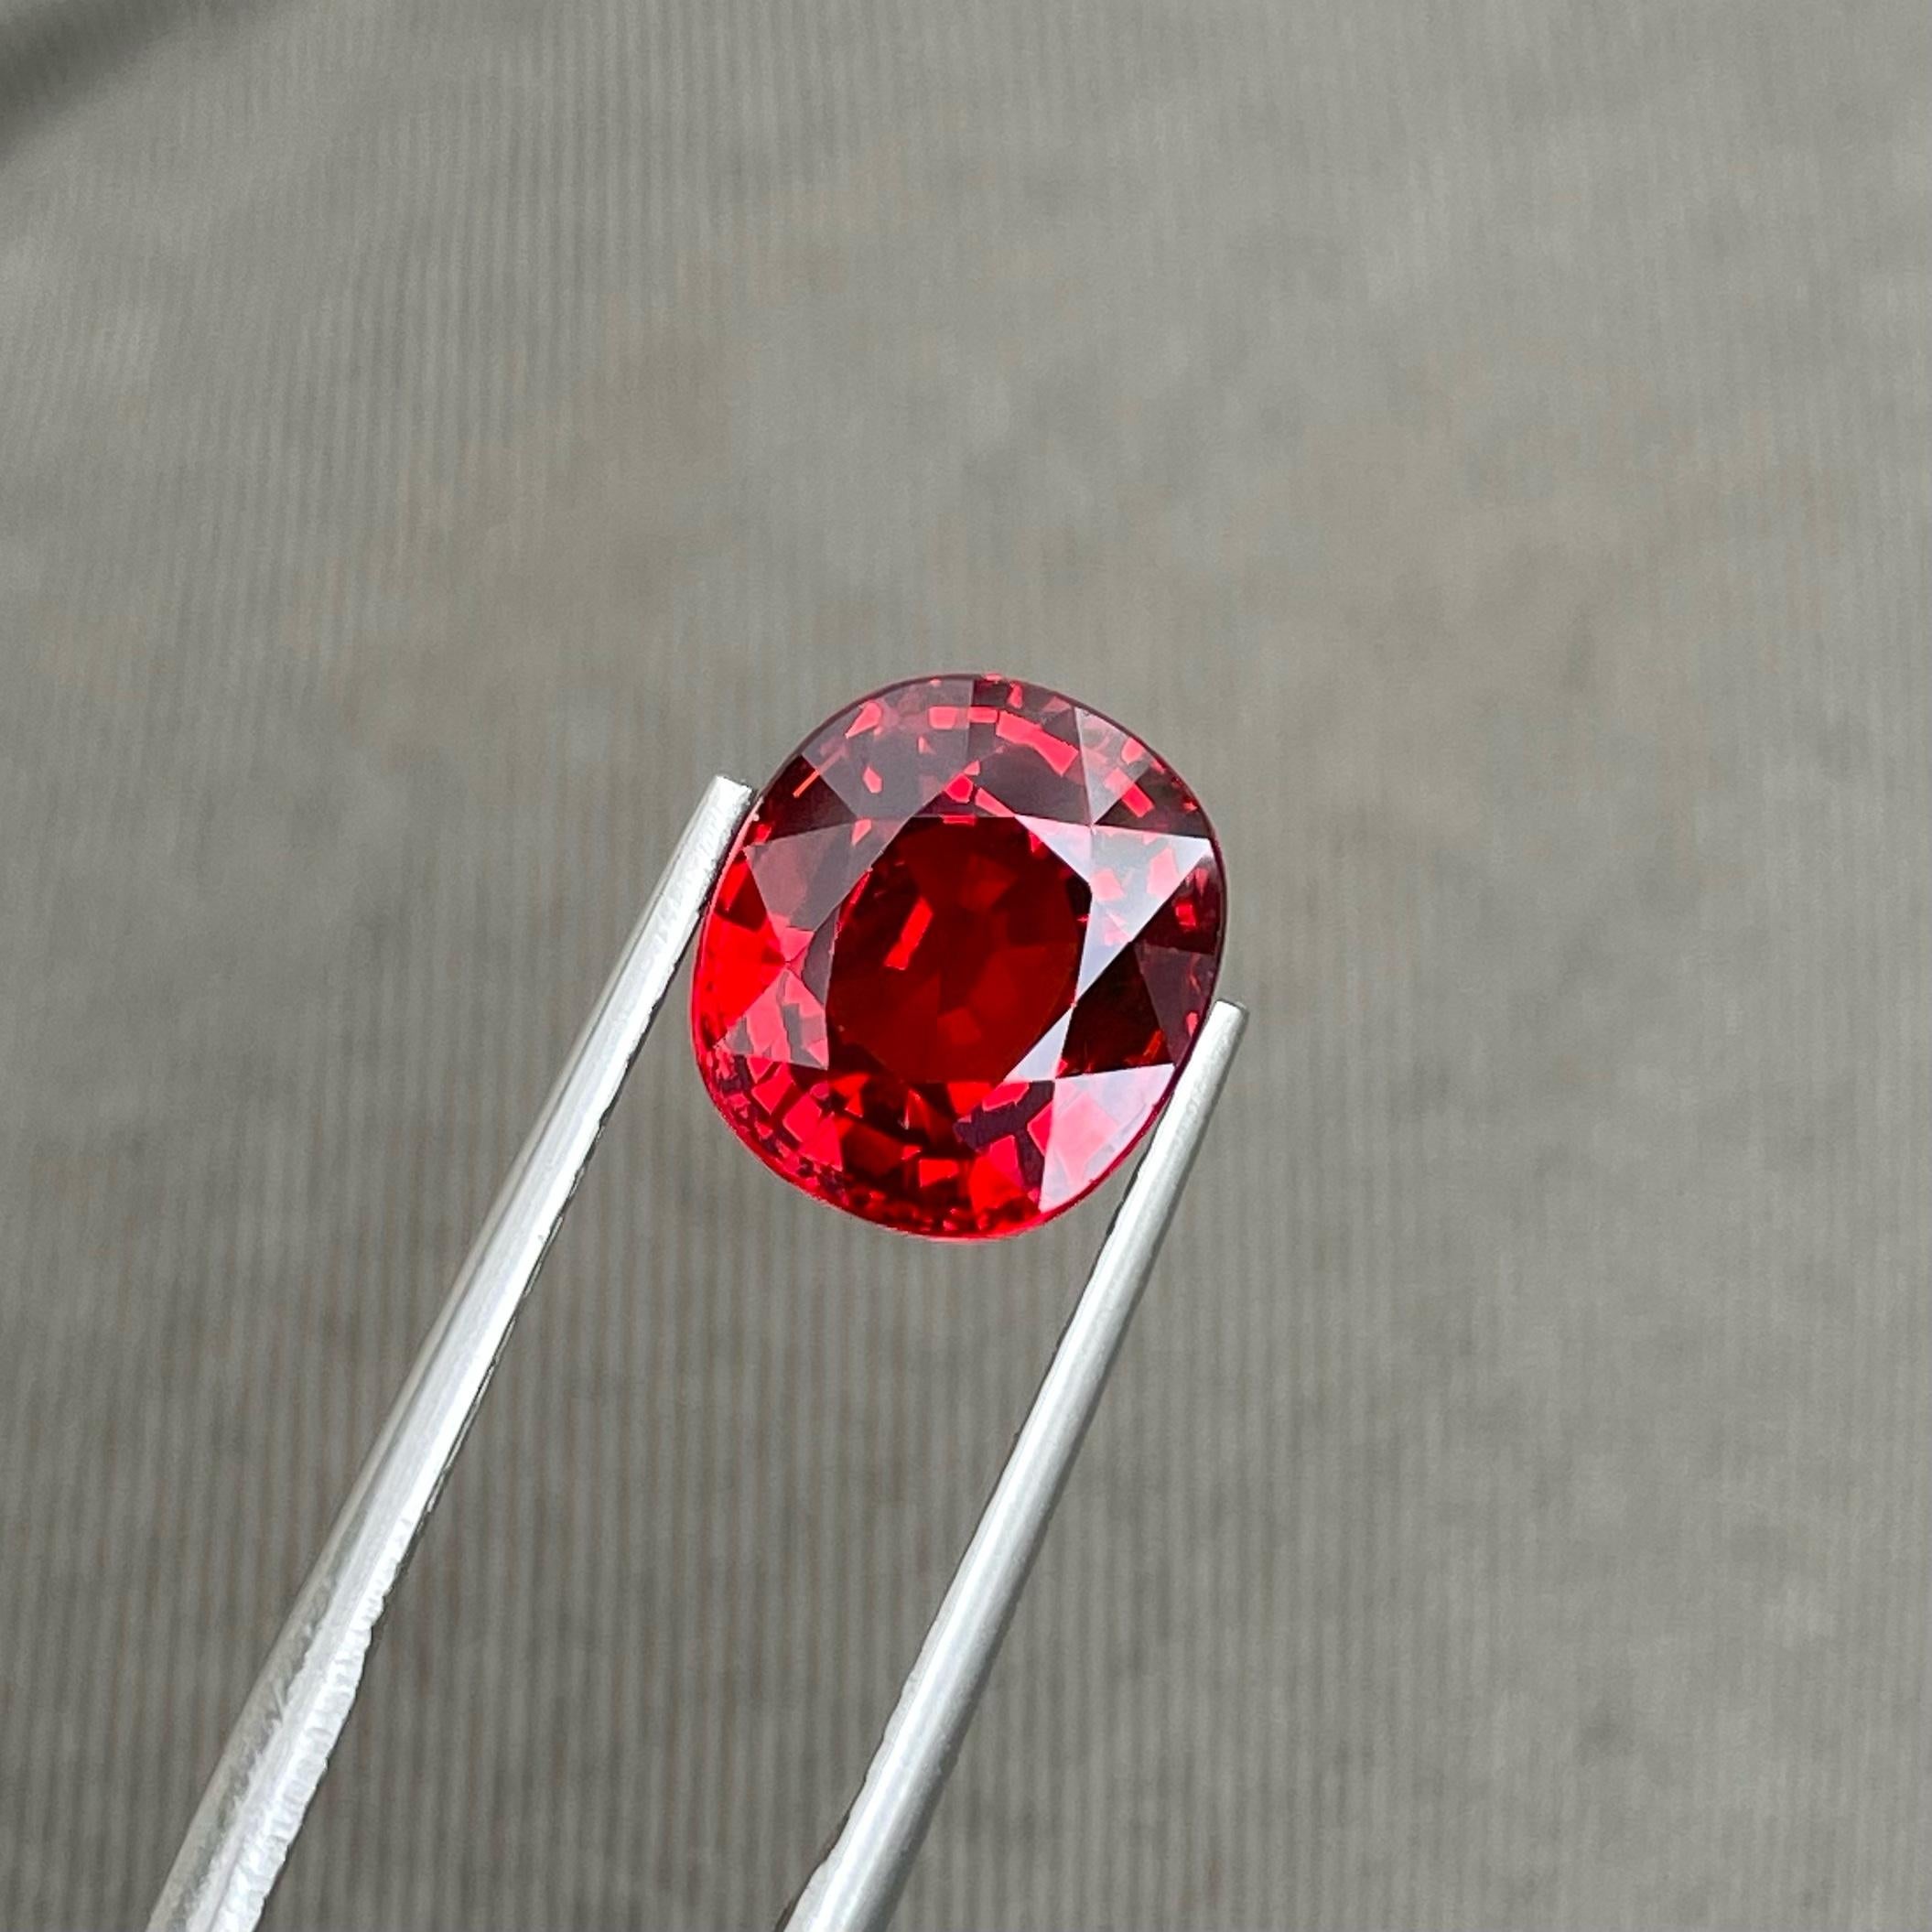 Weight 6.15 carats 
Dimensions 10.5 x 9.4 x 6.6 mm
Treatment None 
Origin Tanzania 
Clarity VVS (Very, Very Slightly Included)
Shape Oval 
Cut Fancy Oval 


Discover the allure of a rare and vibrant Red Spessartite Garnet, meticulously cut into a